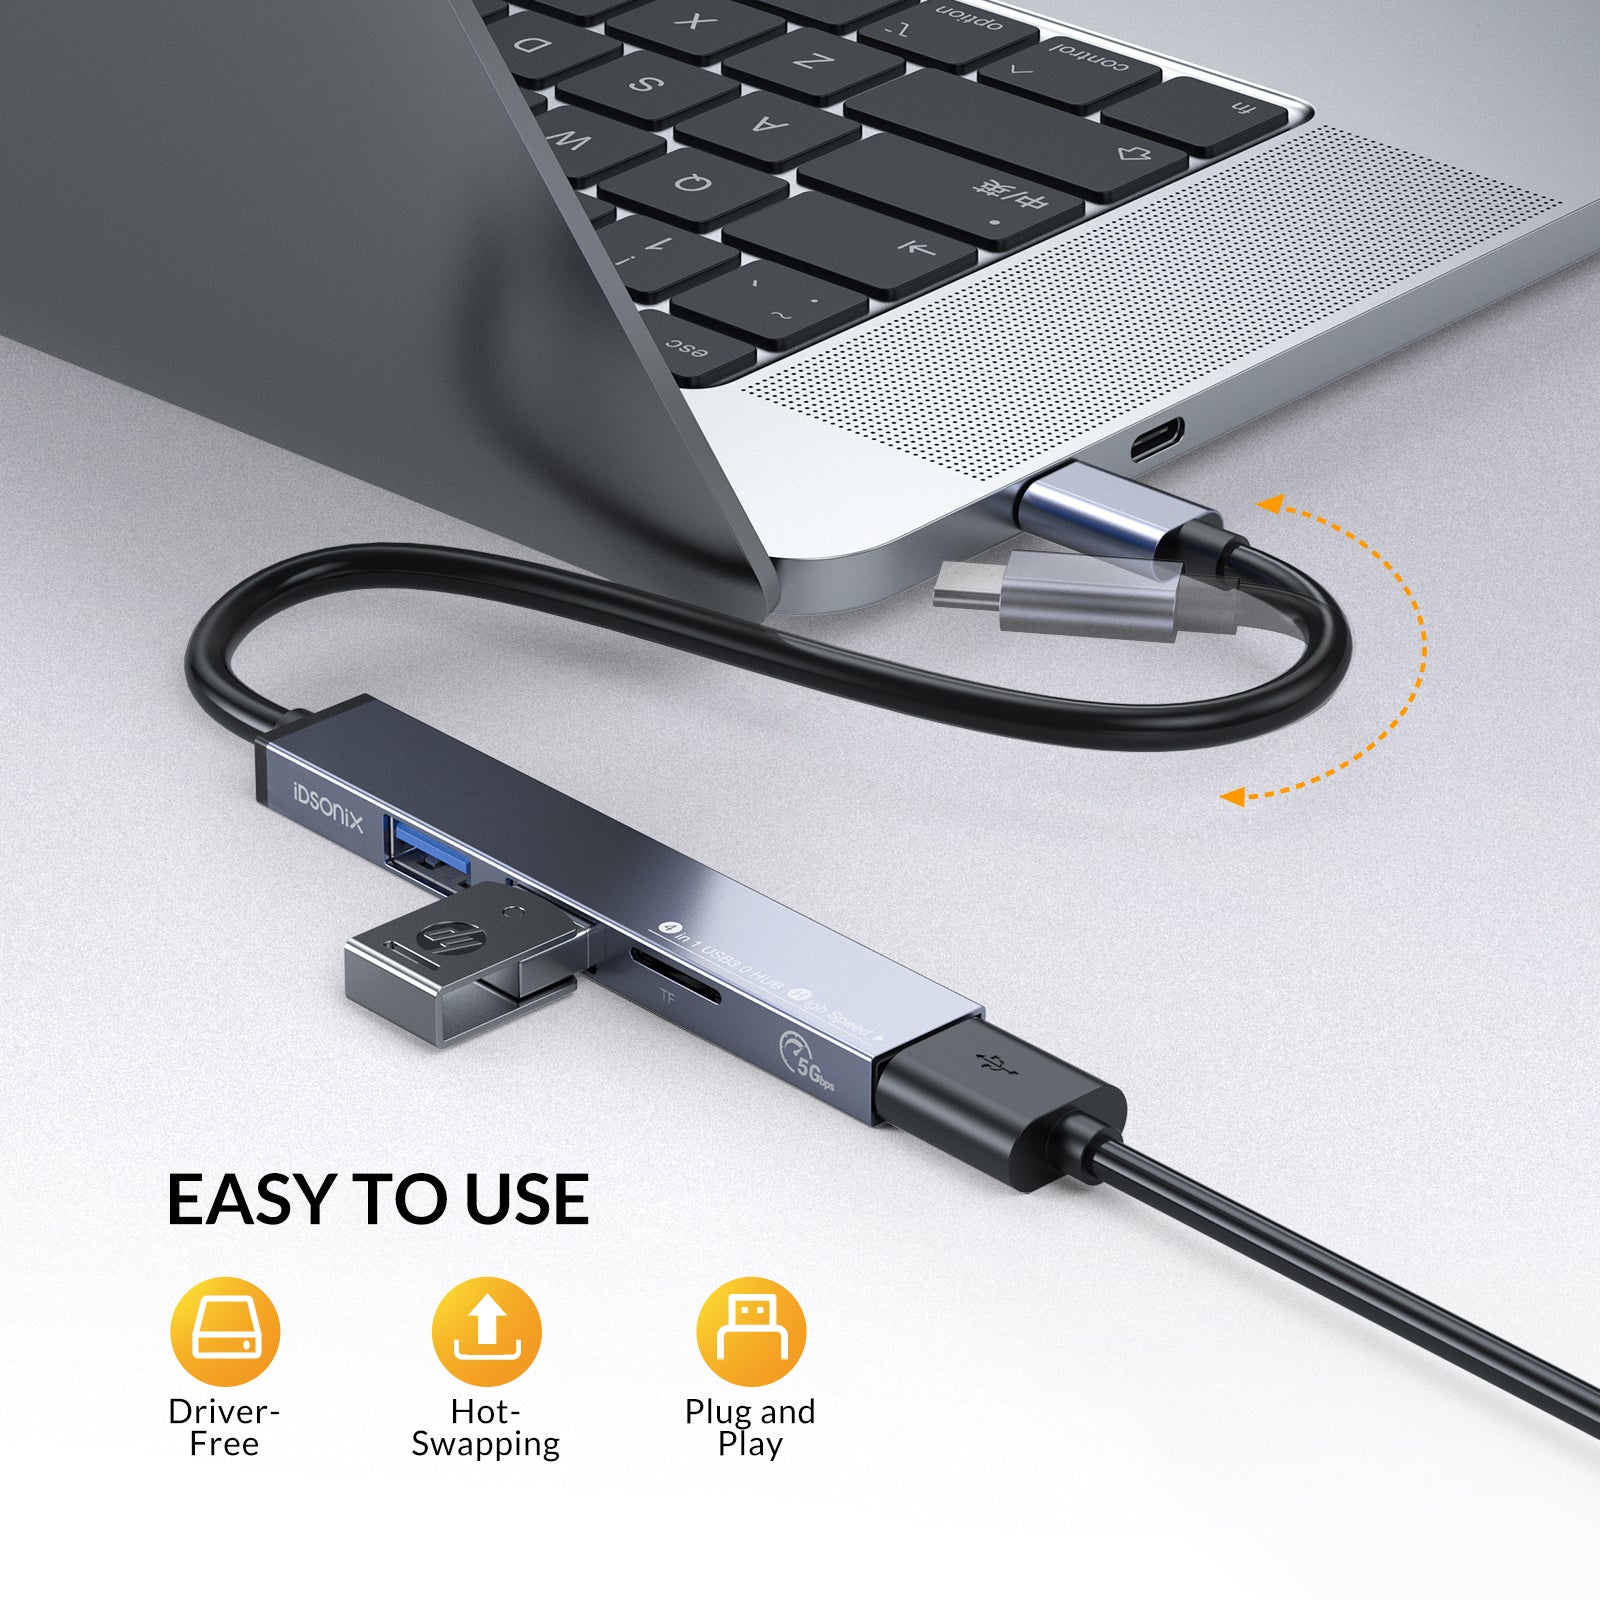 iDsonix 4 in 1 USB-C Laptop USB Type C Hub Multiport Adapter Docking Station with USB3.0,TF/2*USB 3.0 for Laptop Compatible with PC, Flash Drive, Mobile HDD and More